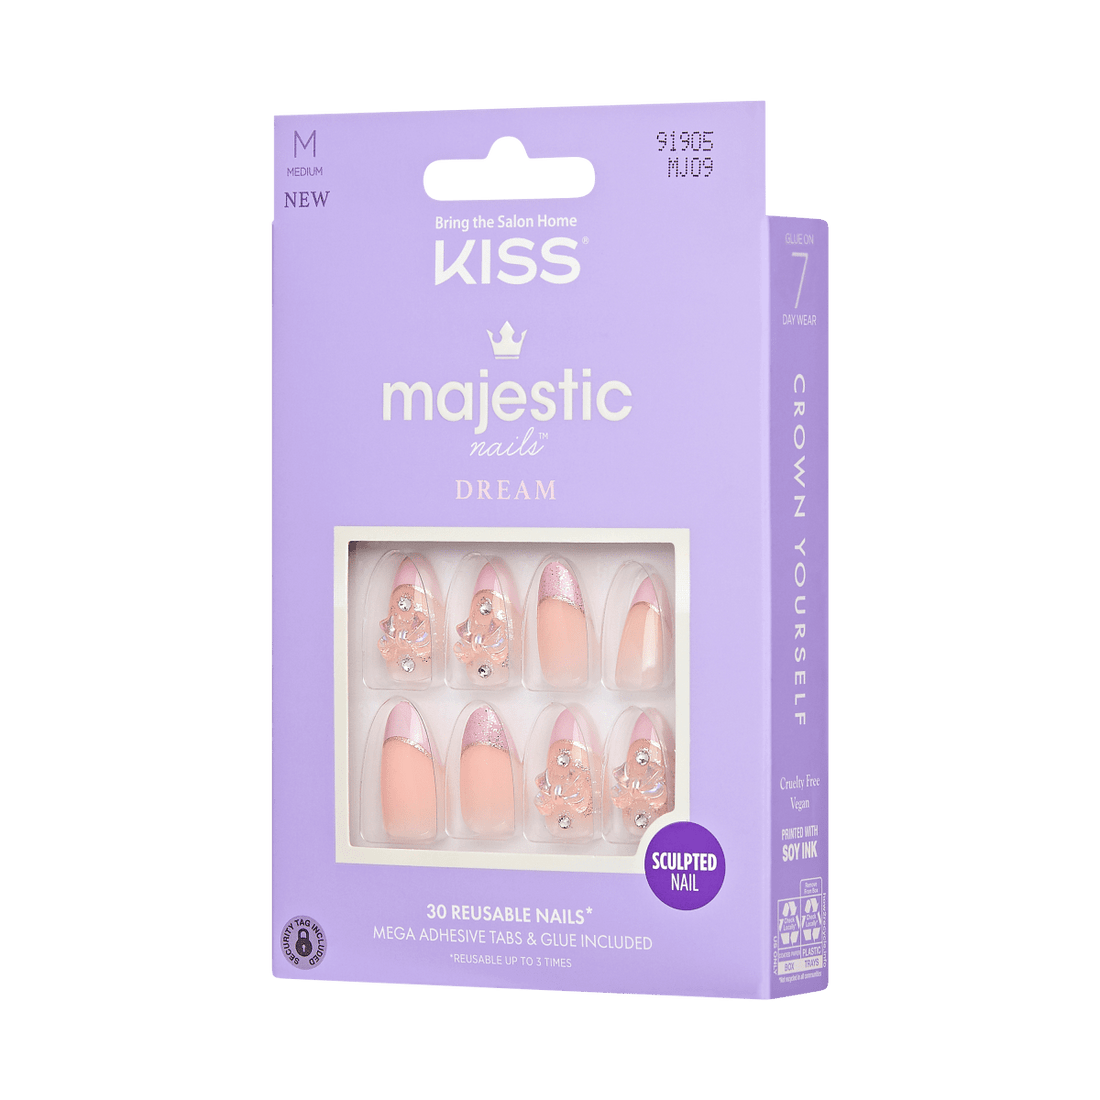 KISS Majestic, Press-On Nails, Maestro, Pink, Med Almond, 30ct